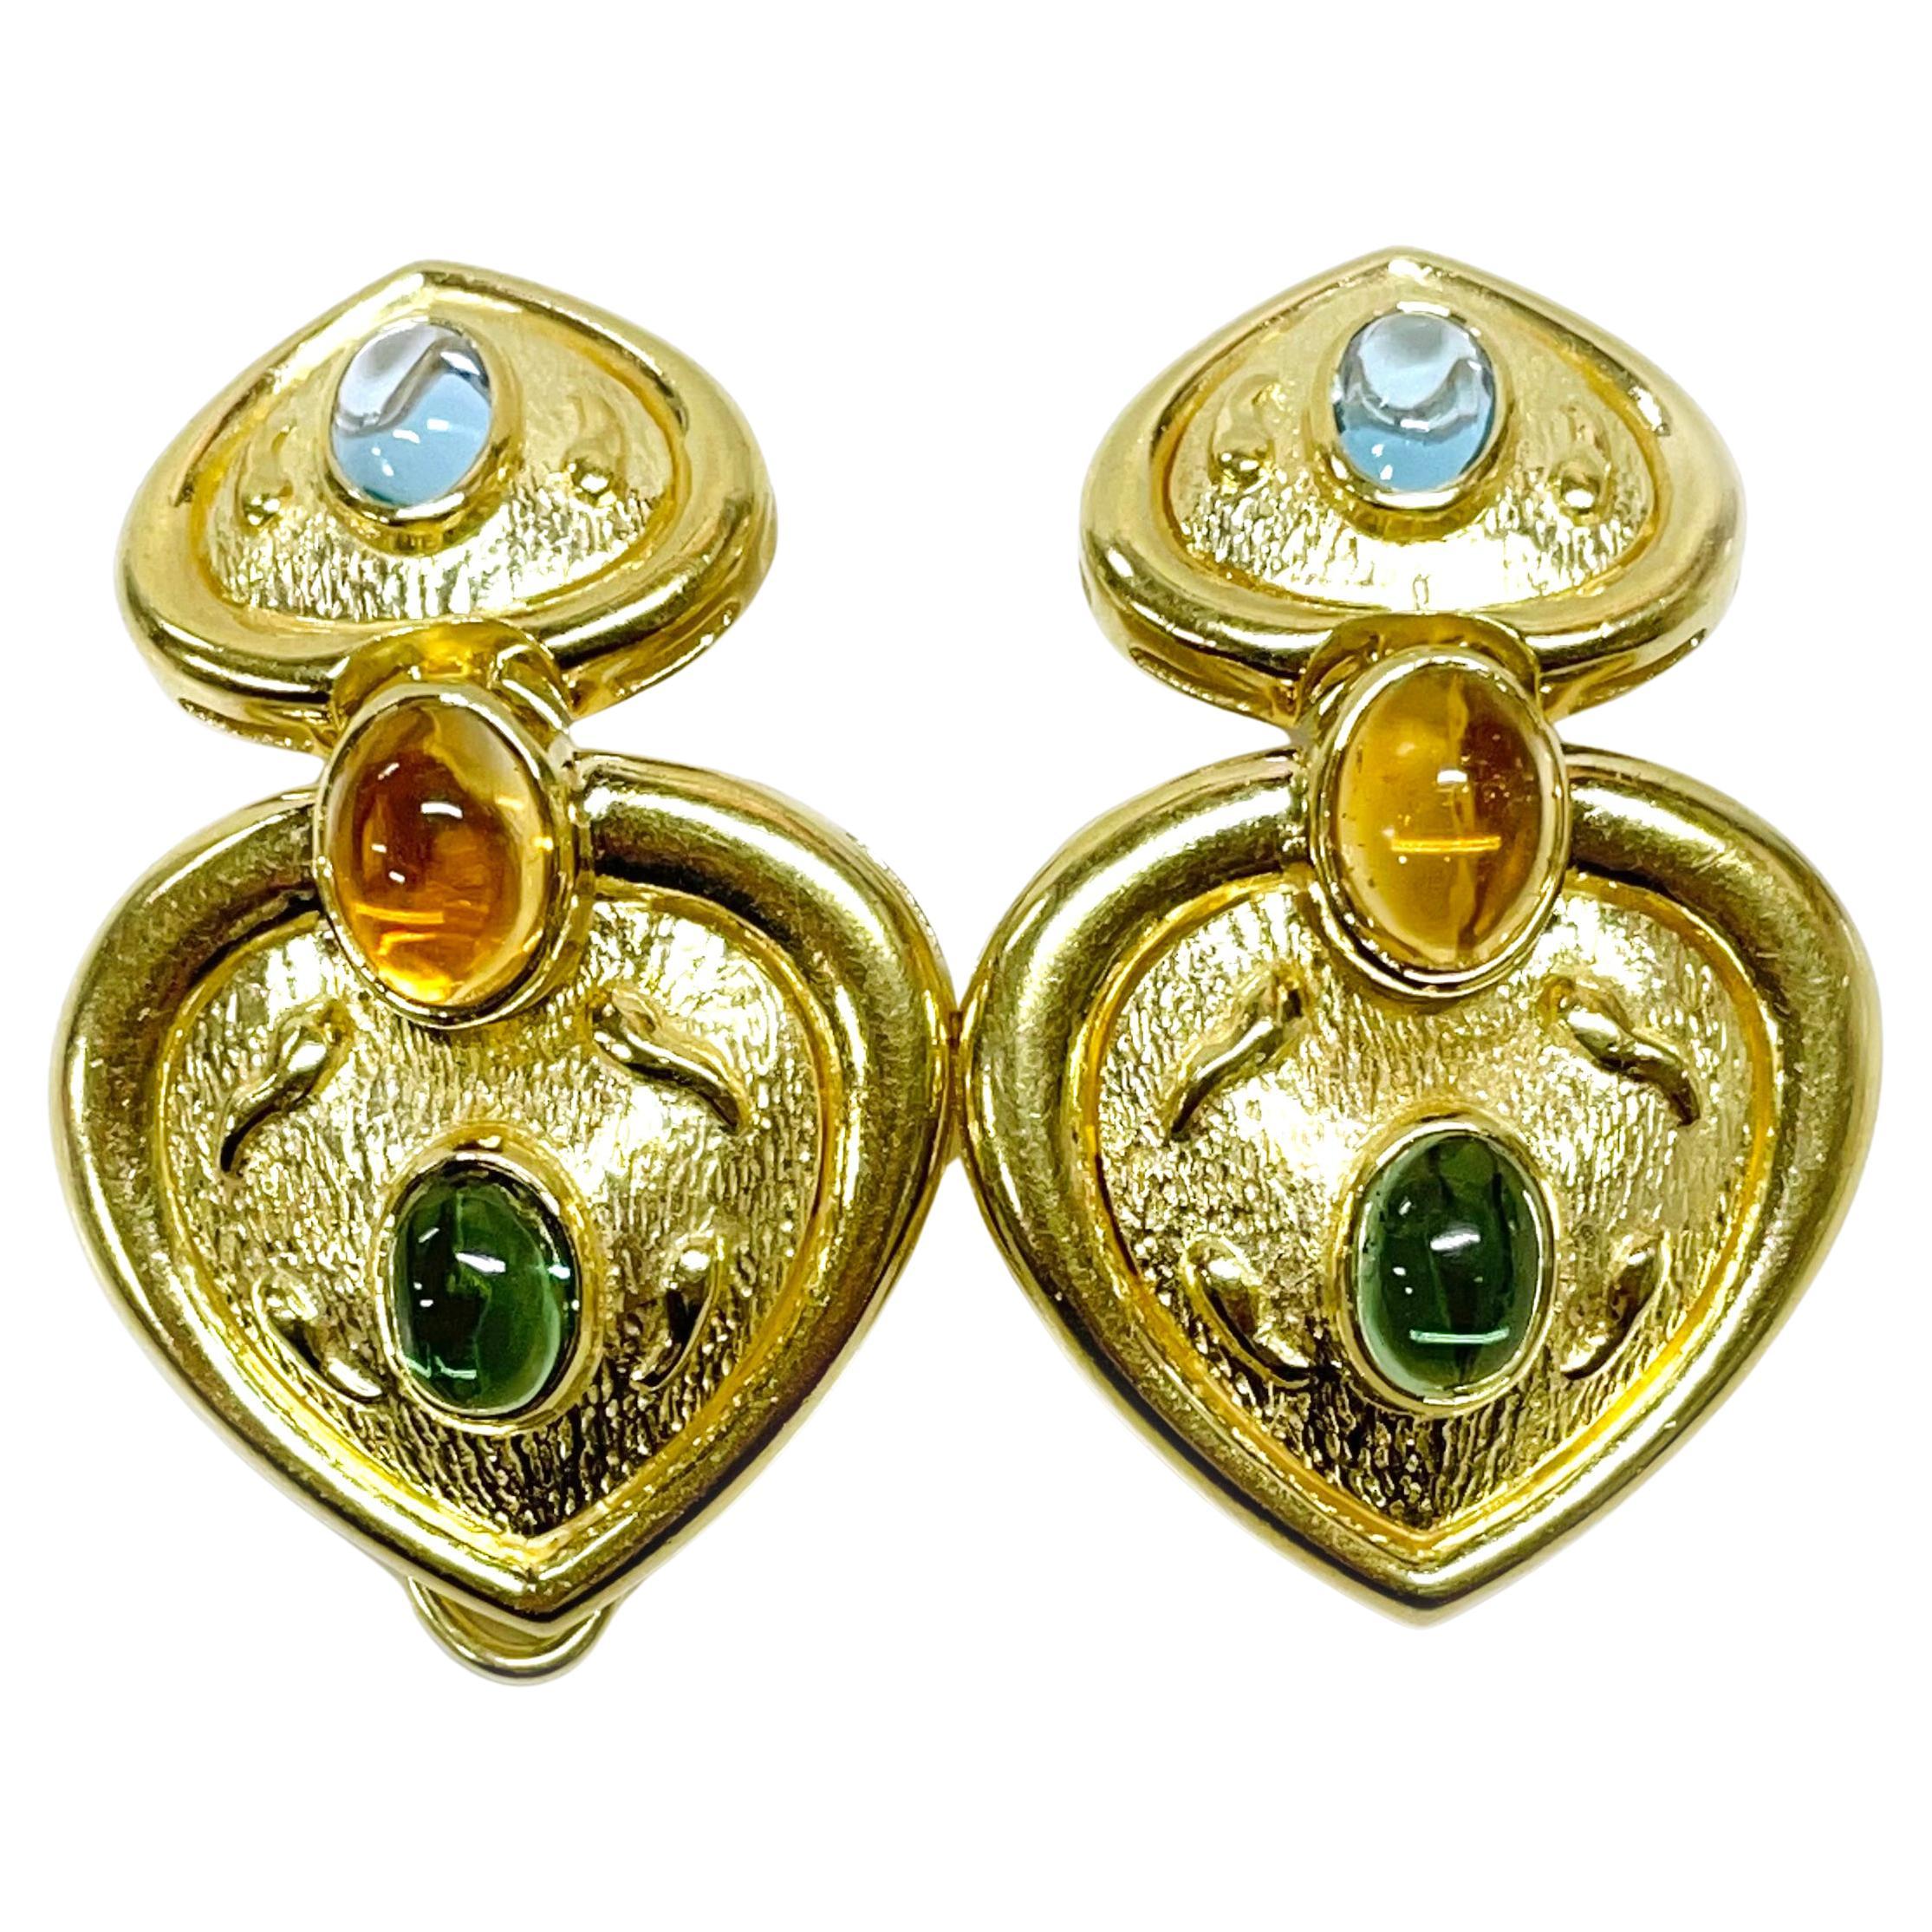 14 Karat Yellow Gold Heart Cabochon Earrings. These striking earrings make a statement with their bold heart design accented with colored gemstones. The earrings feature bezel-set oval cabochons of Blue Topaz, Citrine, and Green Tourmaline. The Blue